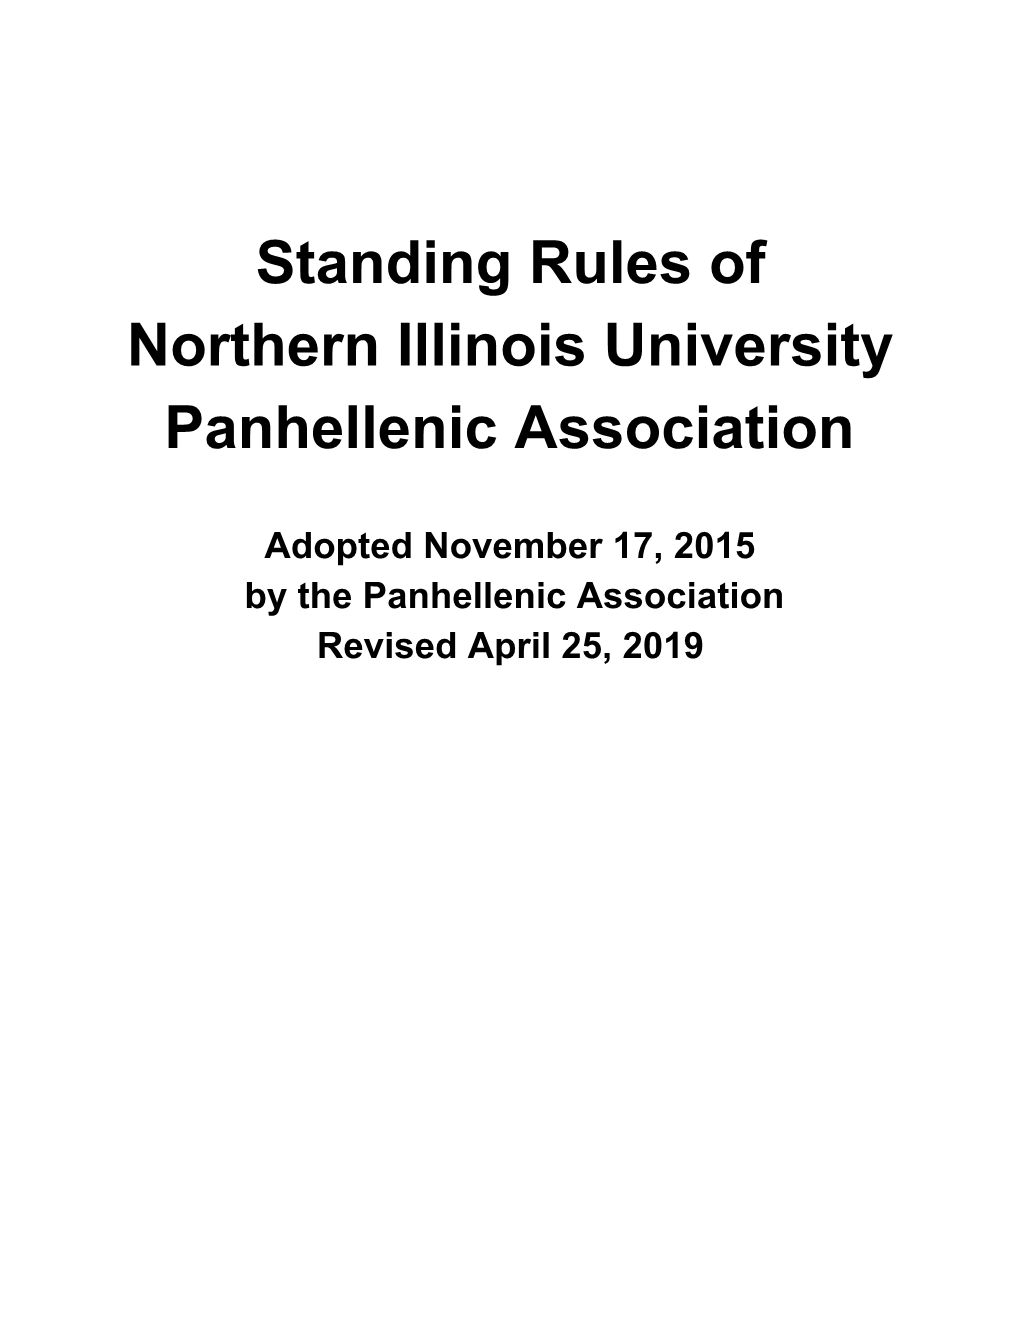 Standing Rules of Northern Illinois University Panhellenic Association